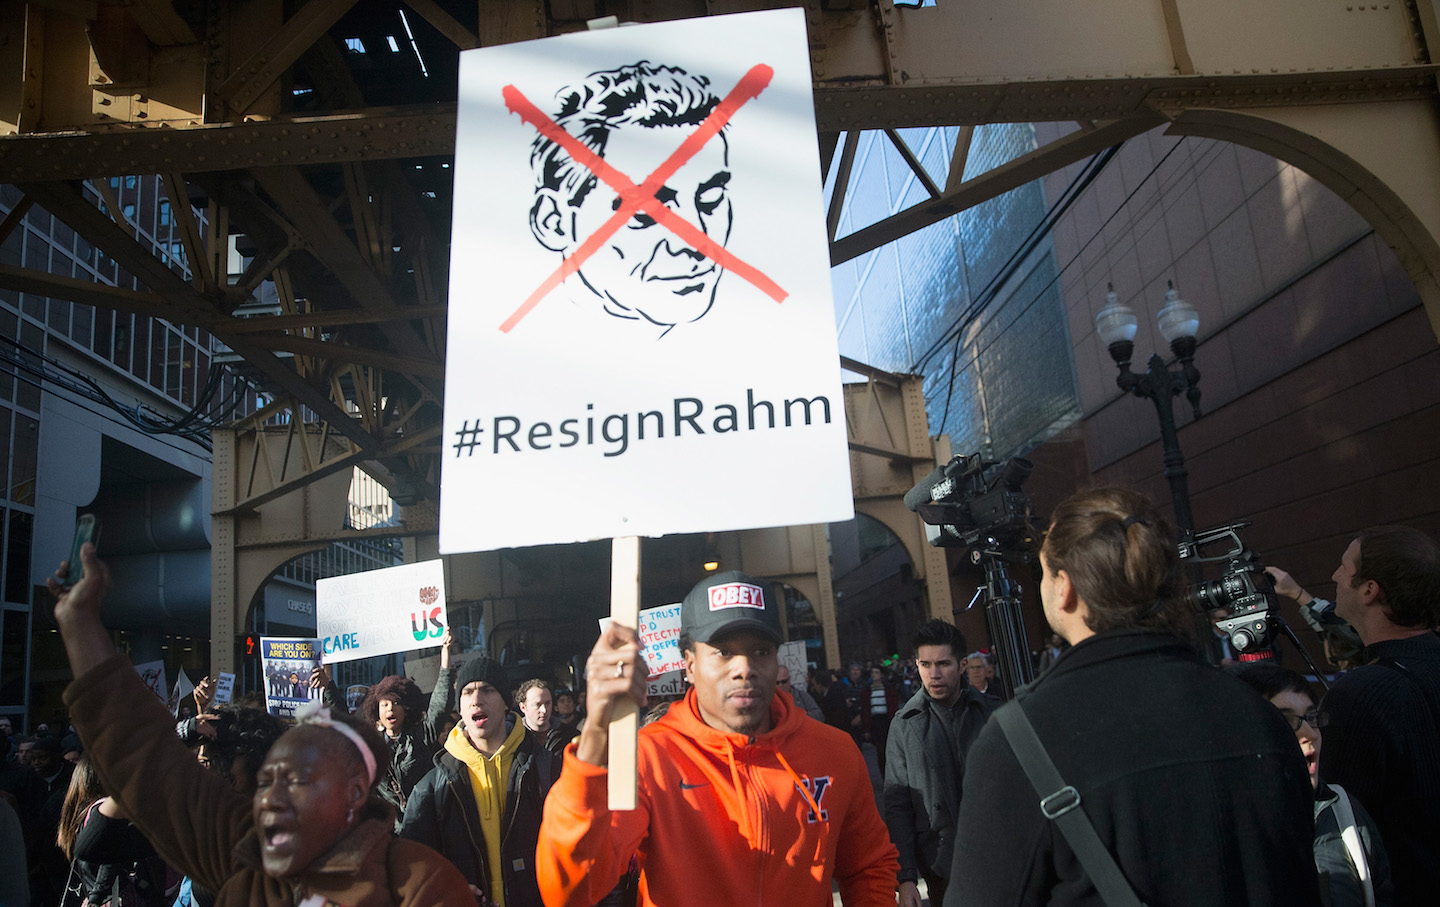 I Know Rahm Emanuel, and He Shouldn’t Be Anywhere Near the White House